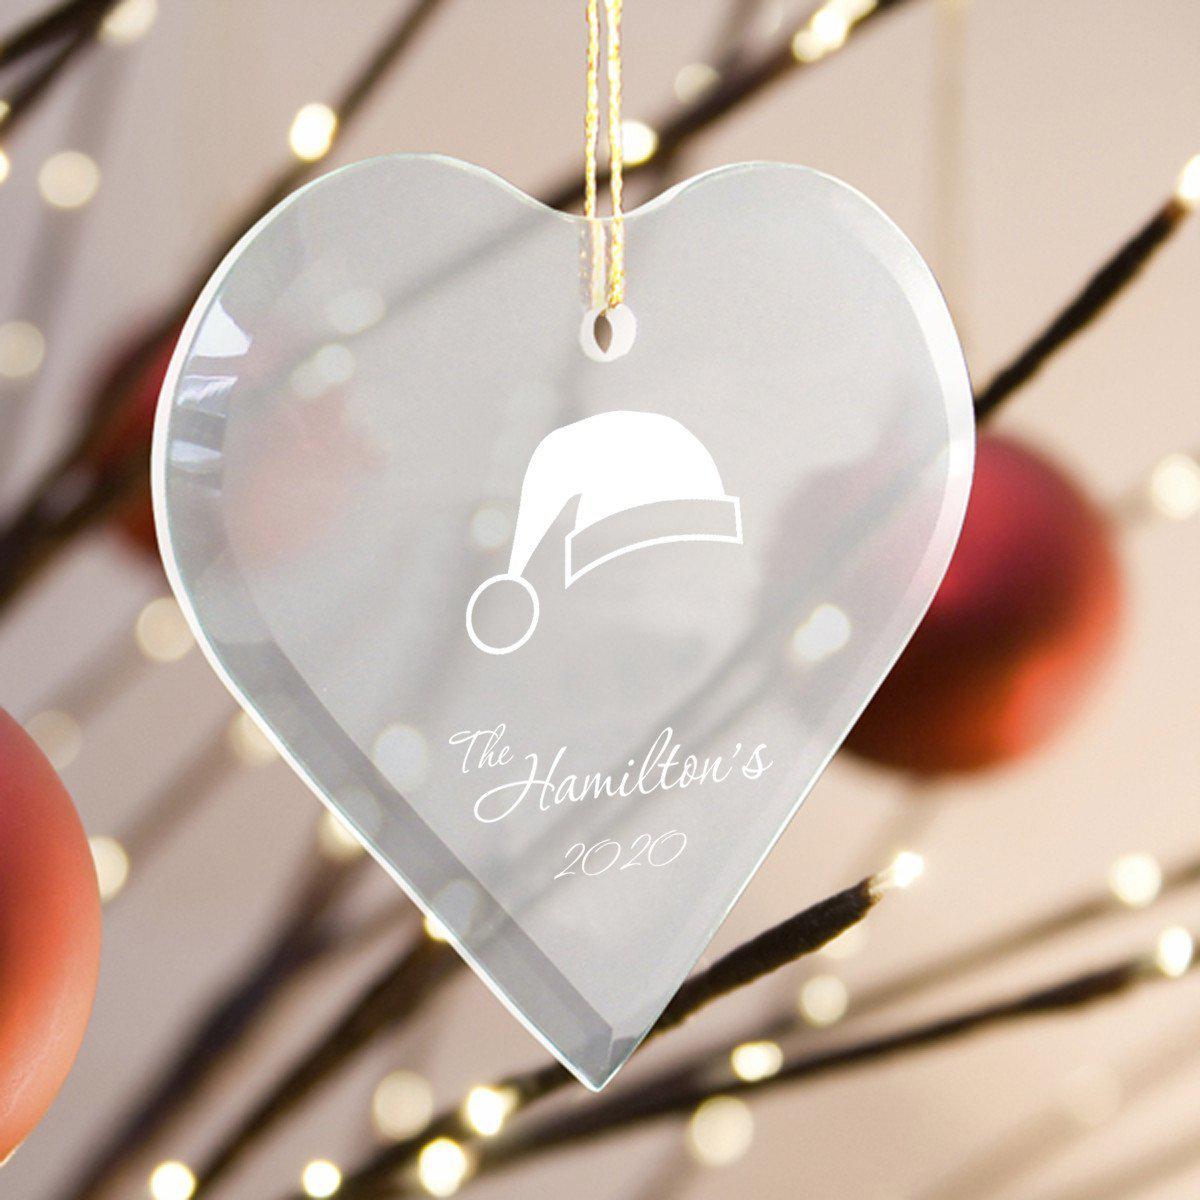 Personalized Beveled Glass Ornament - Heart Shape Personalized Ornament